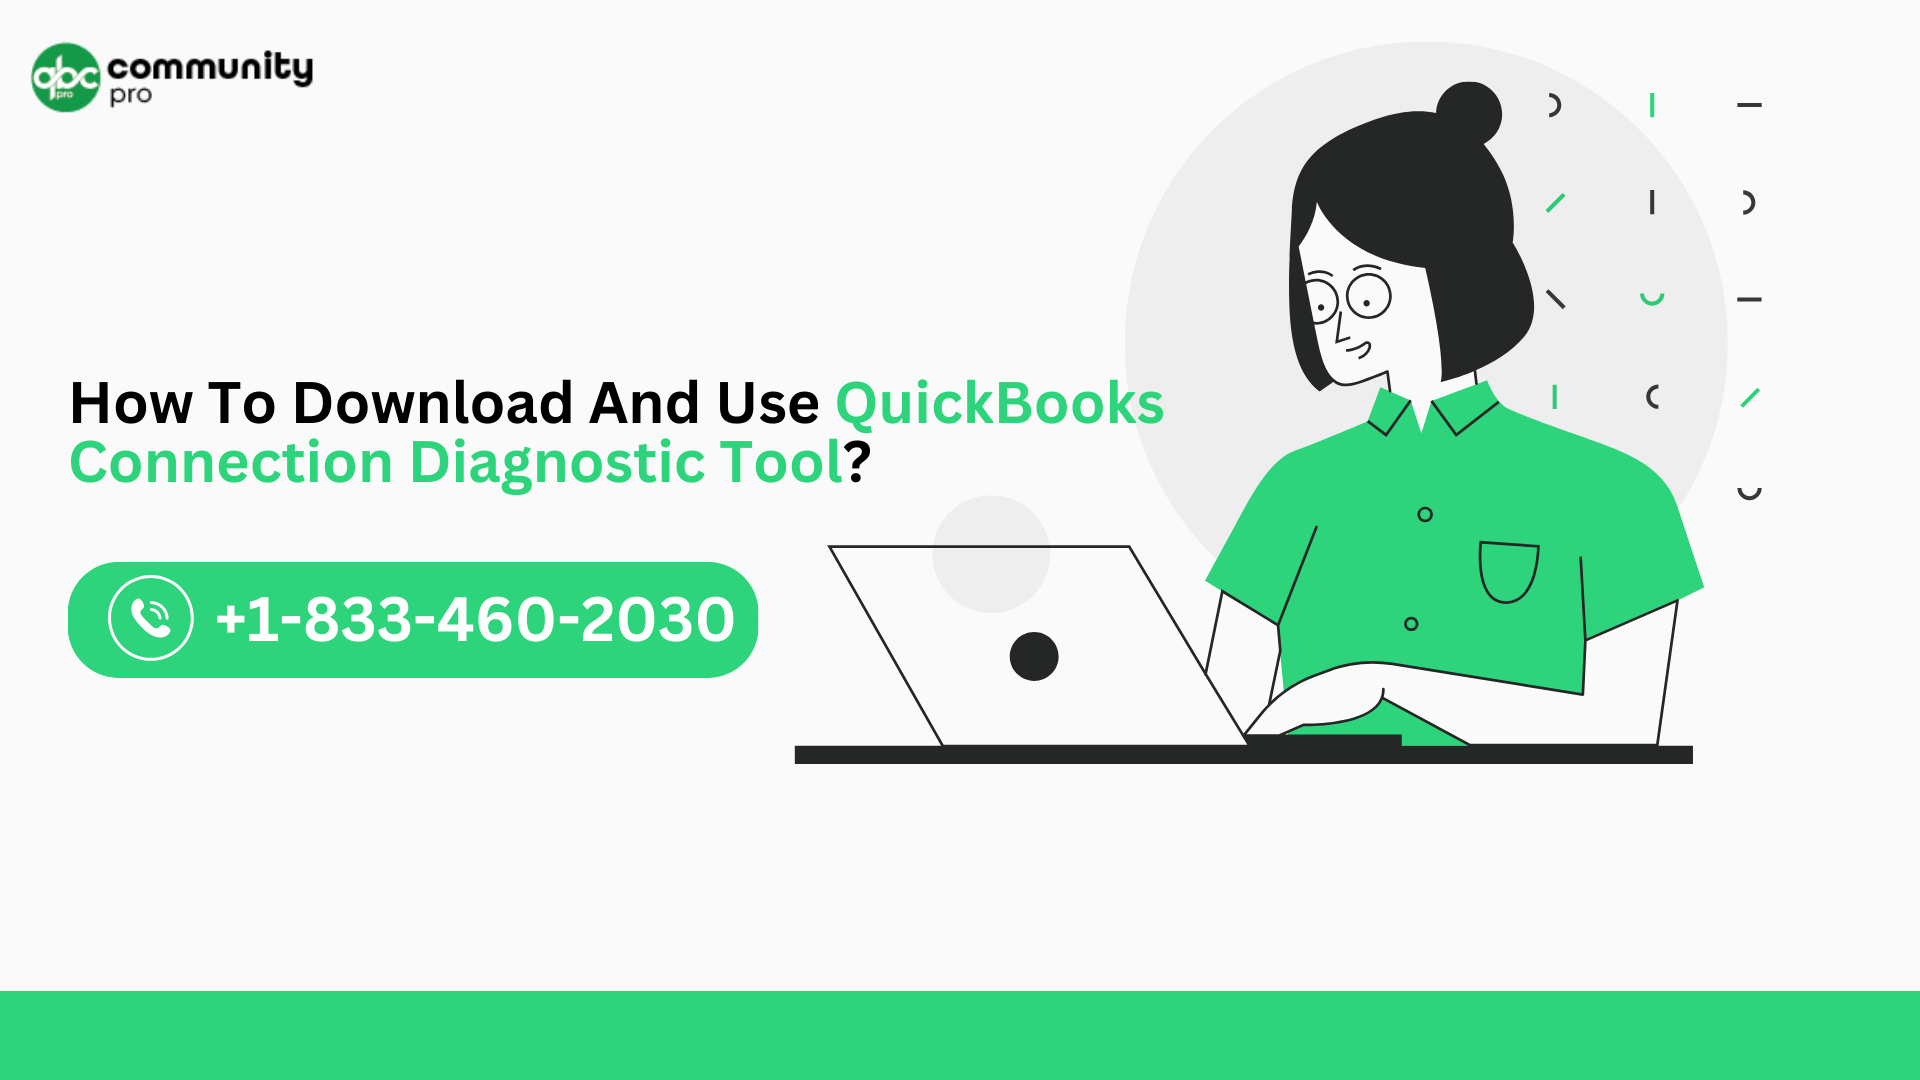 How To Download And Use QuickBooks Connection Diagnostic Tool